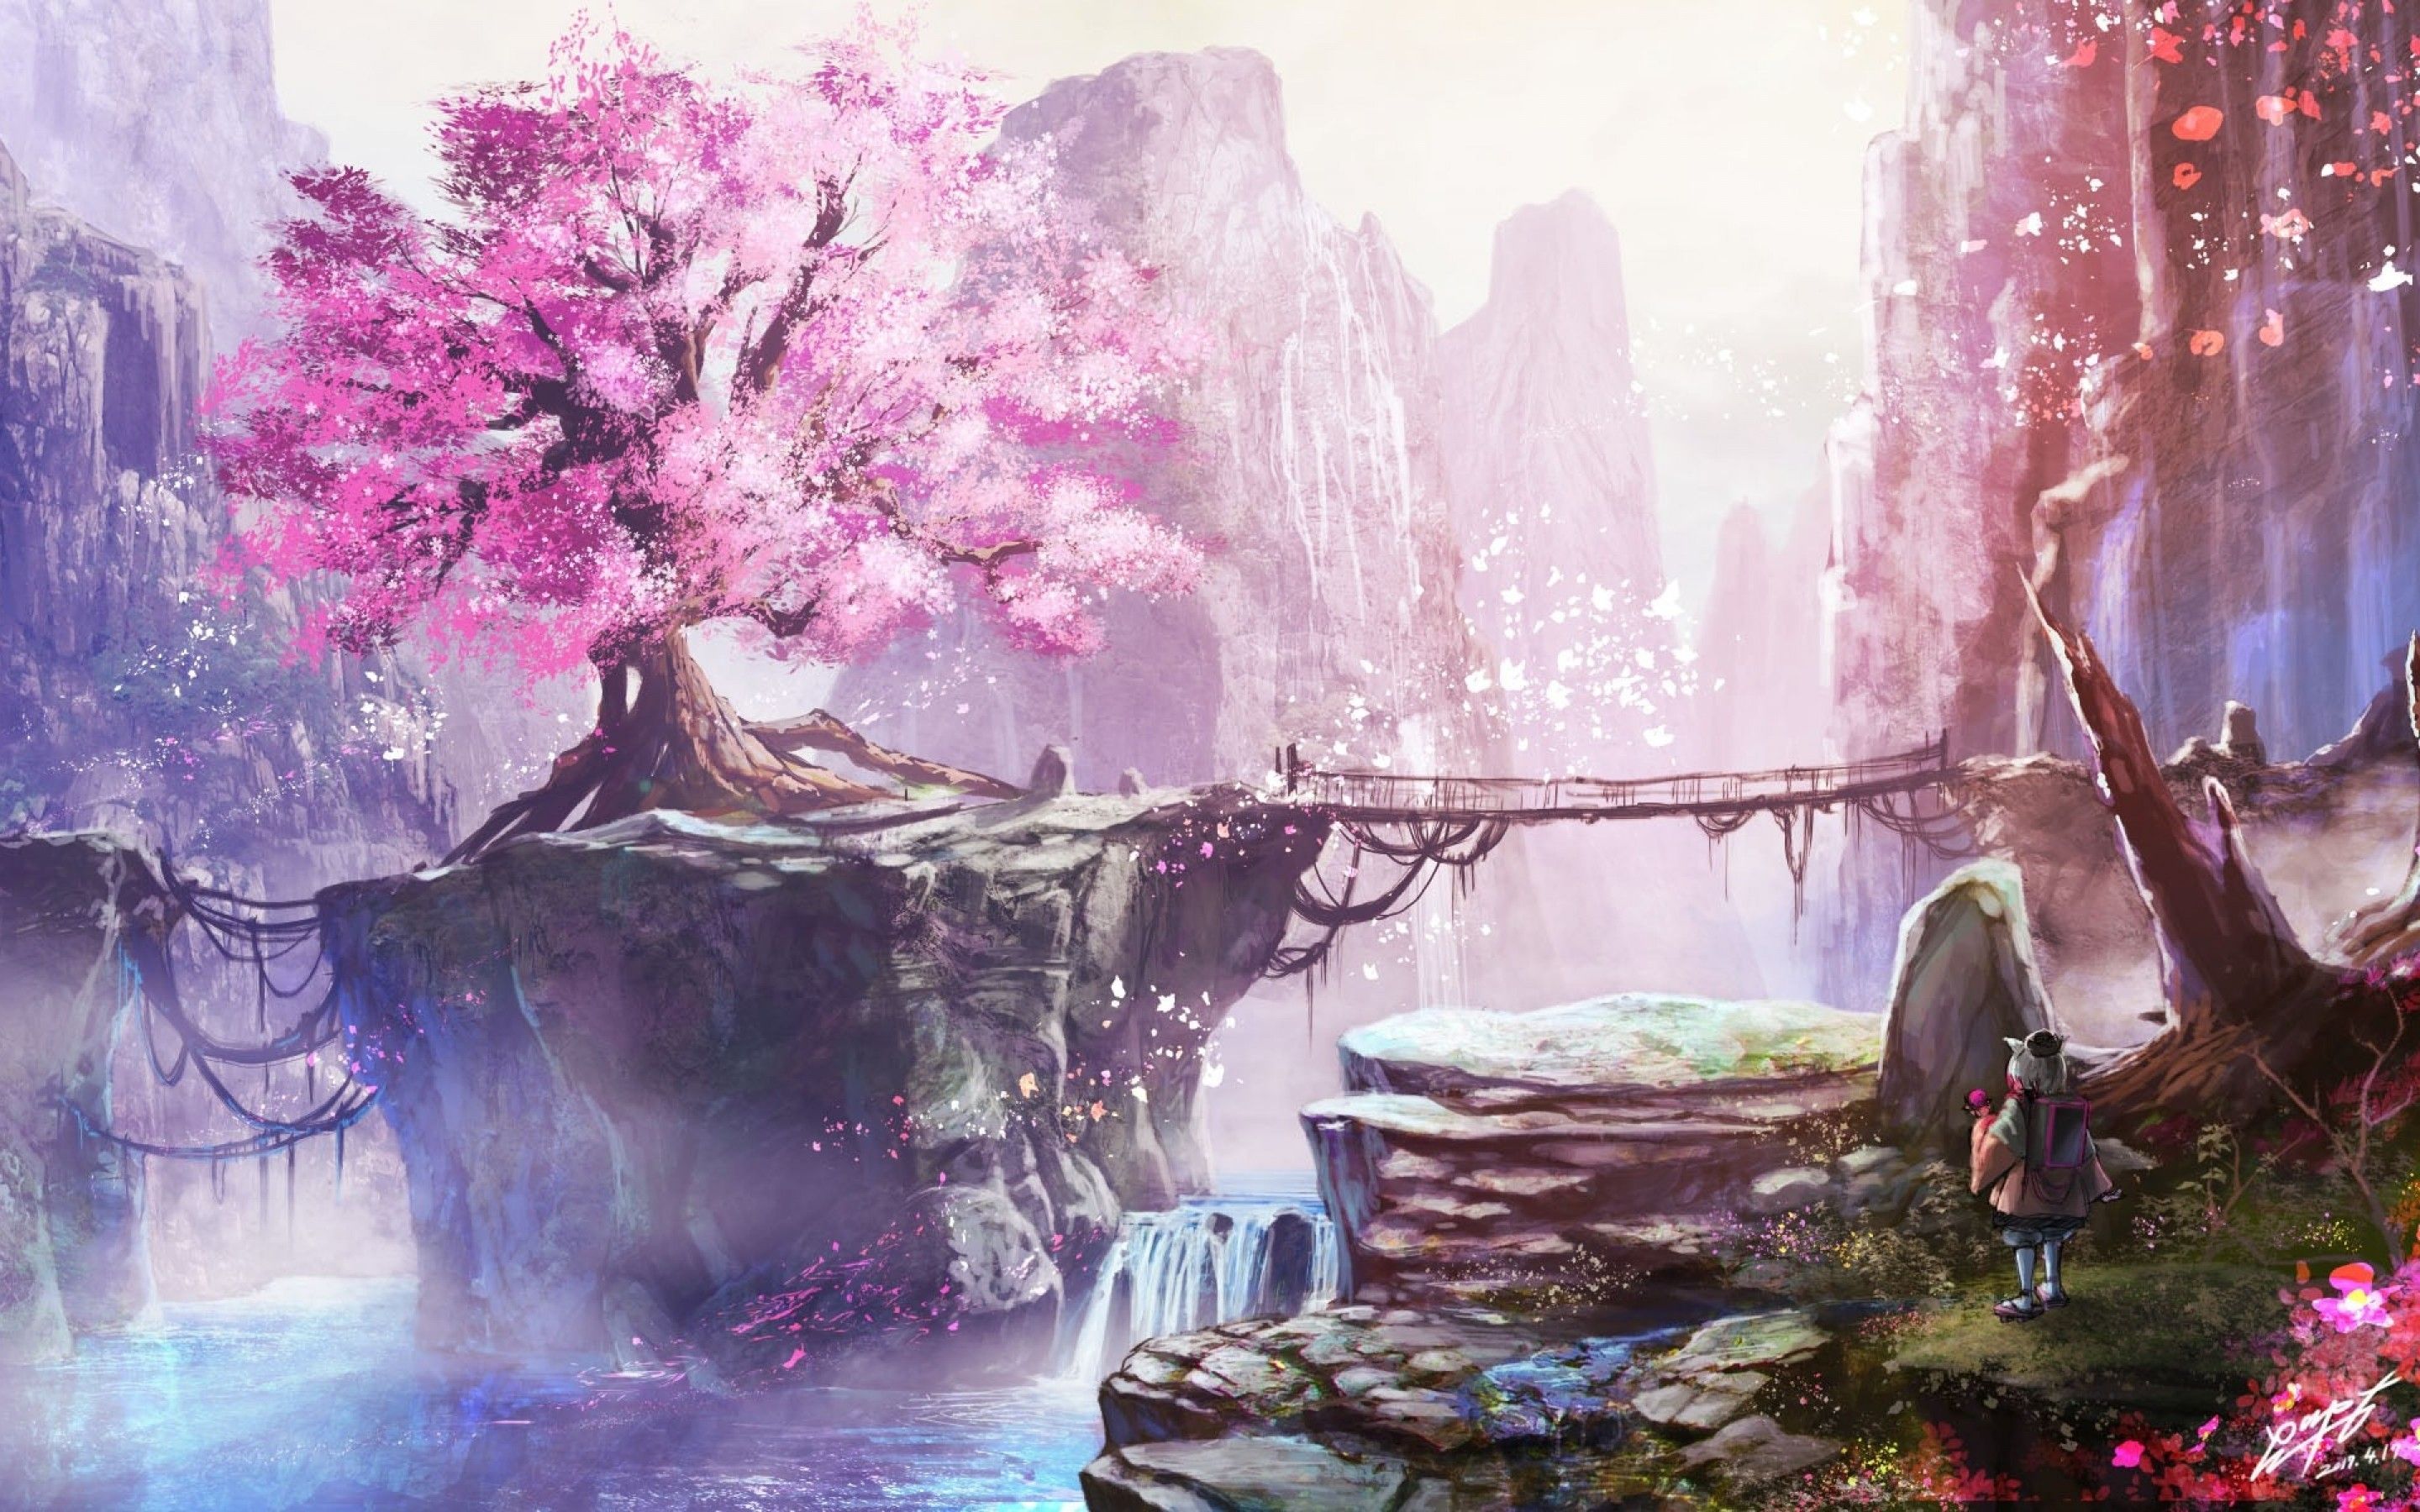 Anime Cherry Blossom Tree #Music #IndieArtist #Chicago. Anime cherry blossom, Cherry blossom wallpaper, Anime scenery